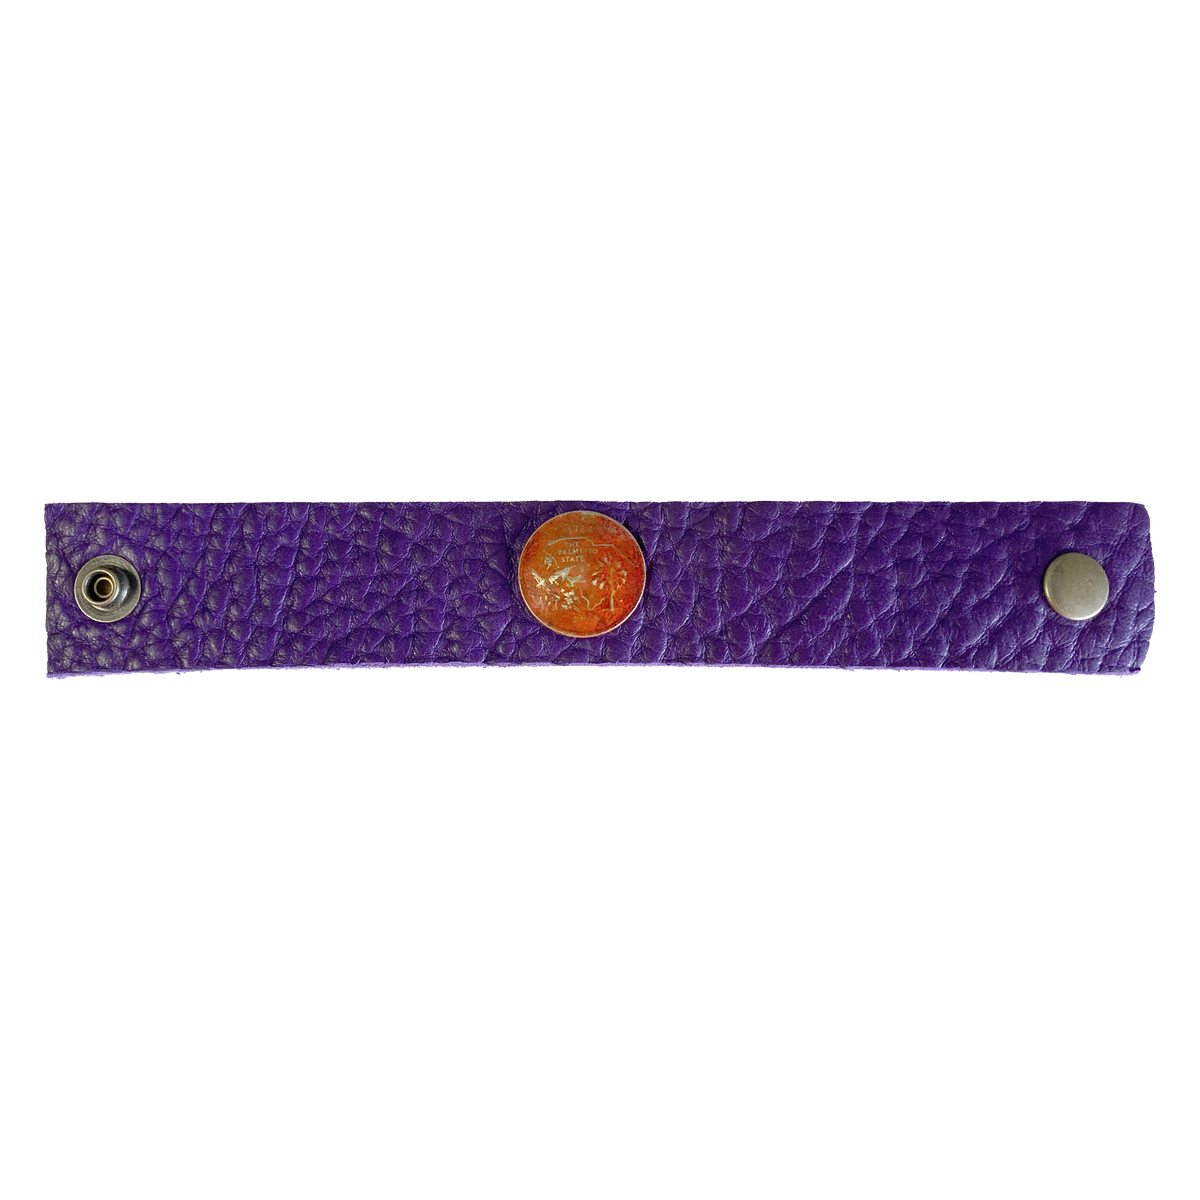 Old Money Genuine Leather Purple Wide Textured Bracelet with State Coin in Orange